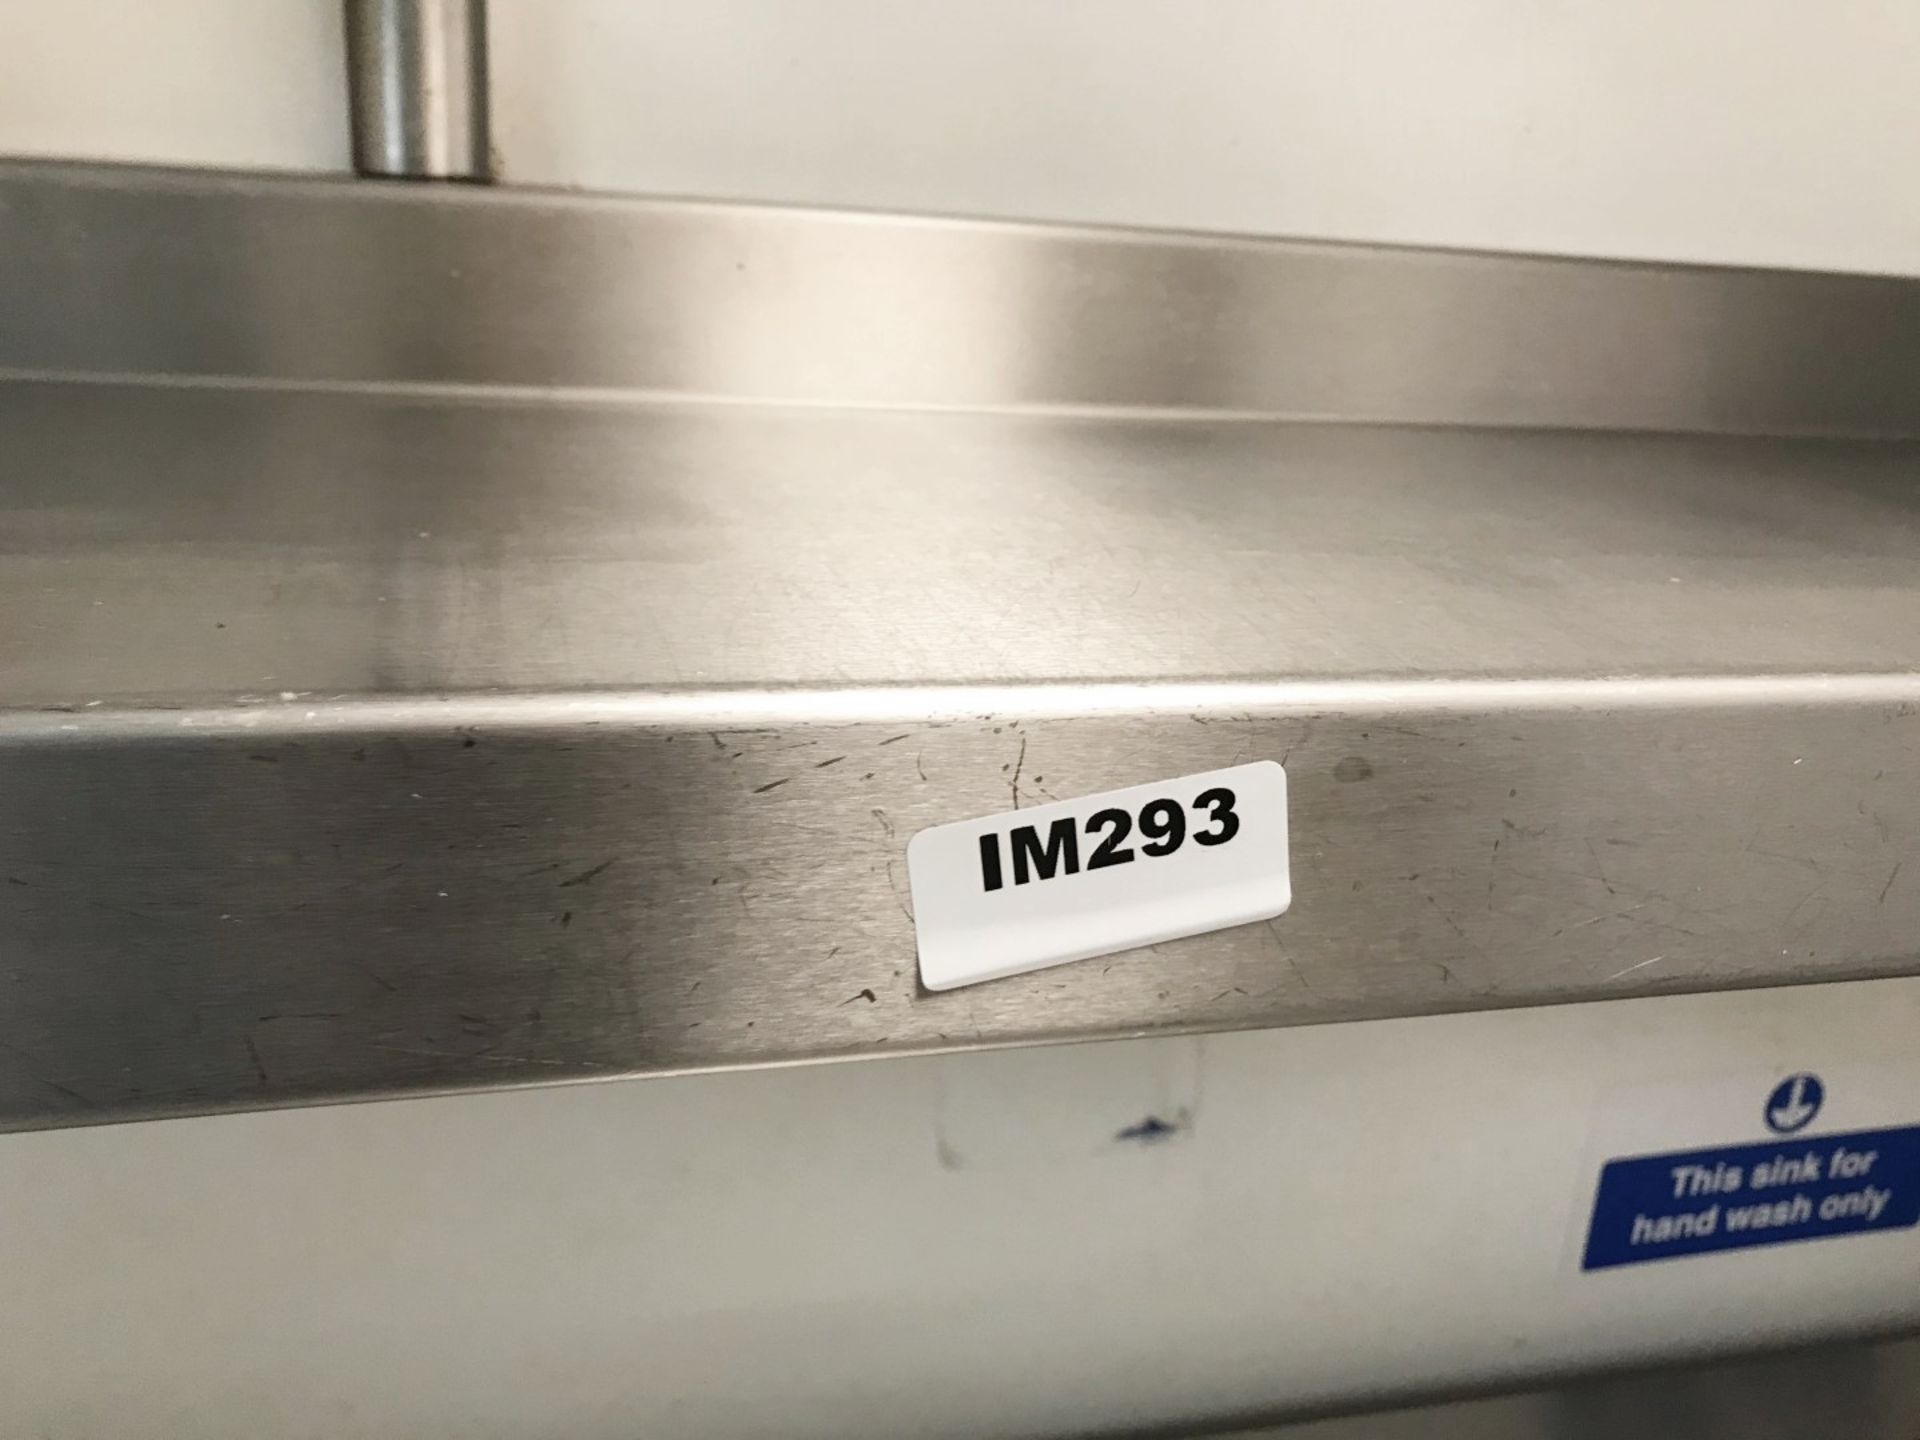 2 x Stainless Steel Shelf Units - Length 160cm - CL554 - Ref IM293 - Location: London E1 - Image 3 of 3